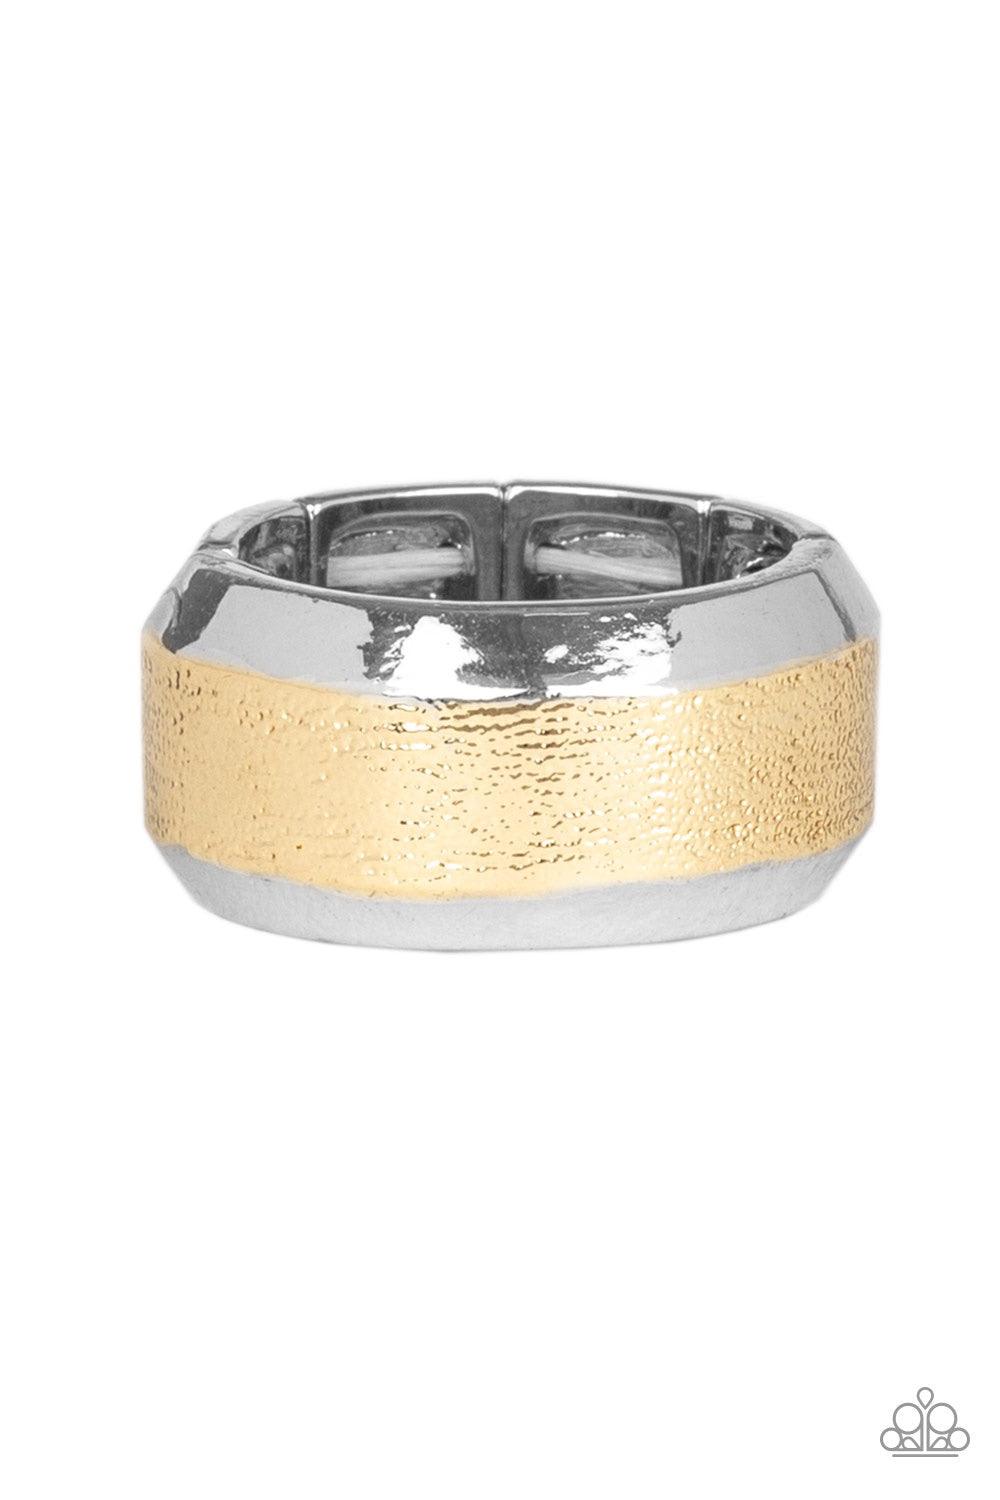 Paparazzi Accessories Checkmate - Multi The center of a beveled silver band has been delicately hammered in shimmery gold detail for a metro inspired look. Features a stretchy band for a flexible fit. Jewelry